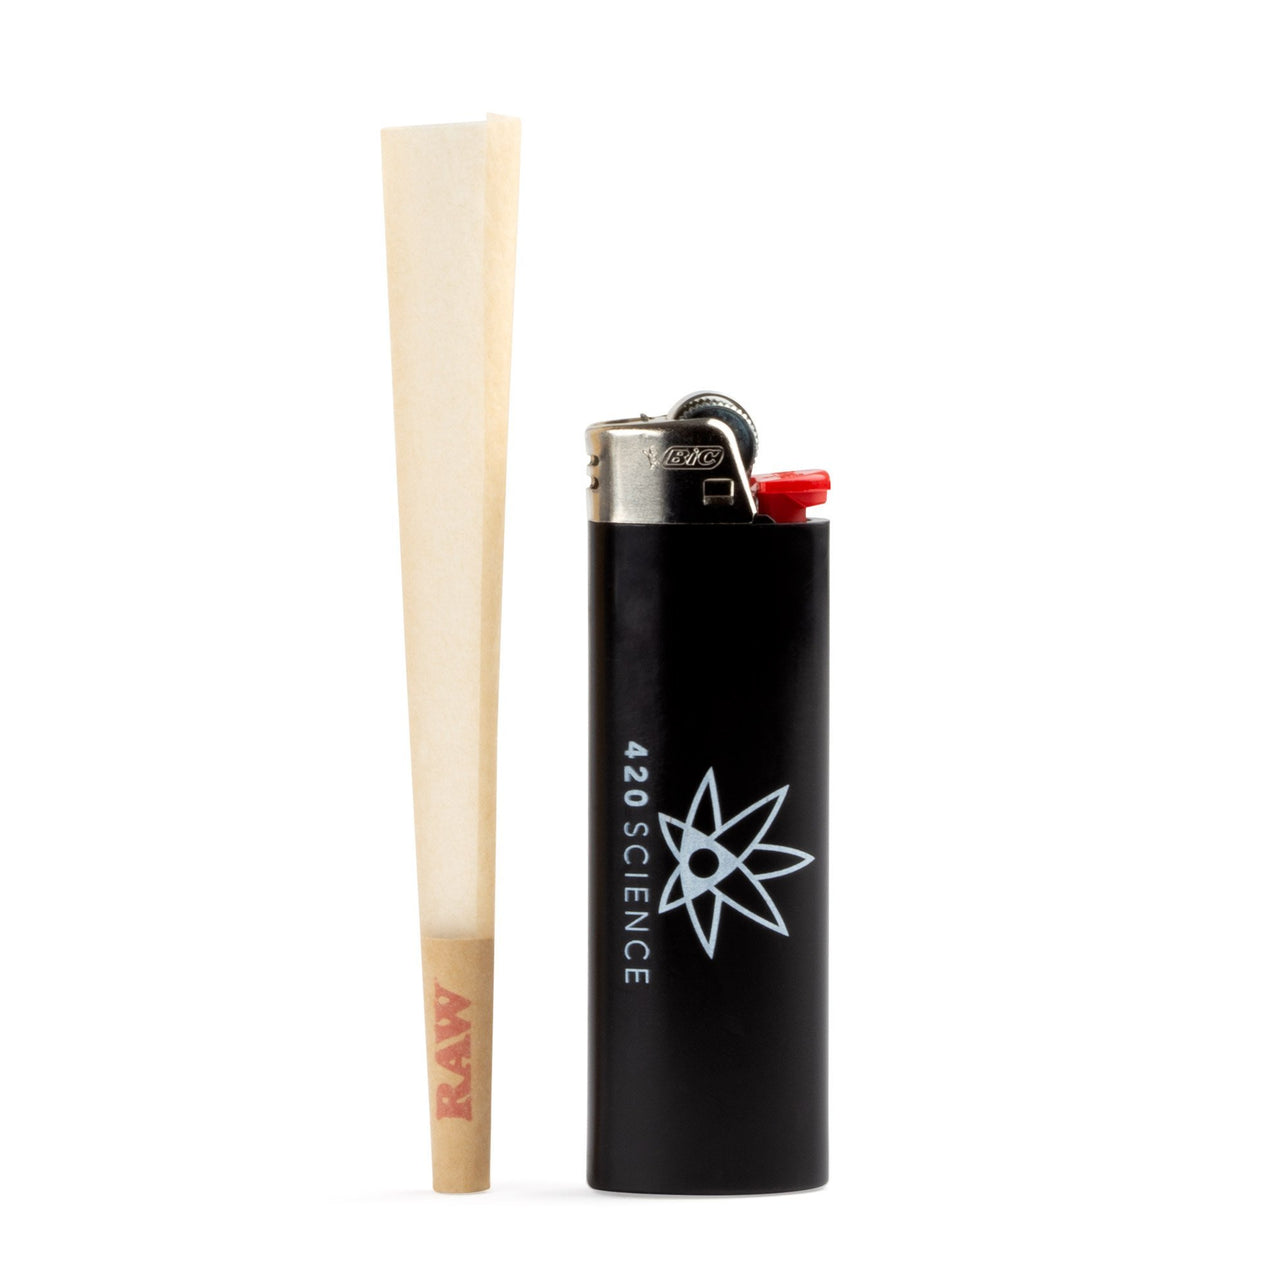 RAW King Size Pre-Rolled Cone Pack - 420 Science - The most trusted online smoke shop.